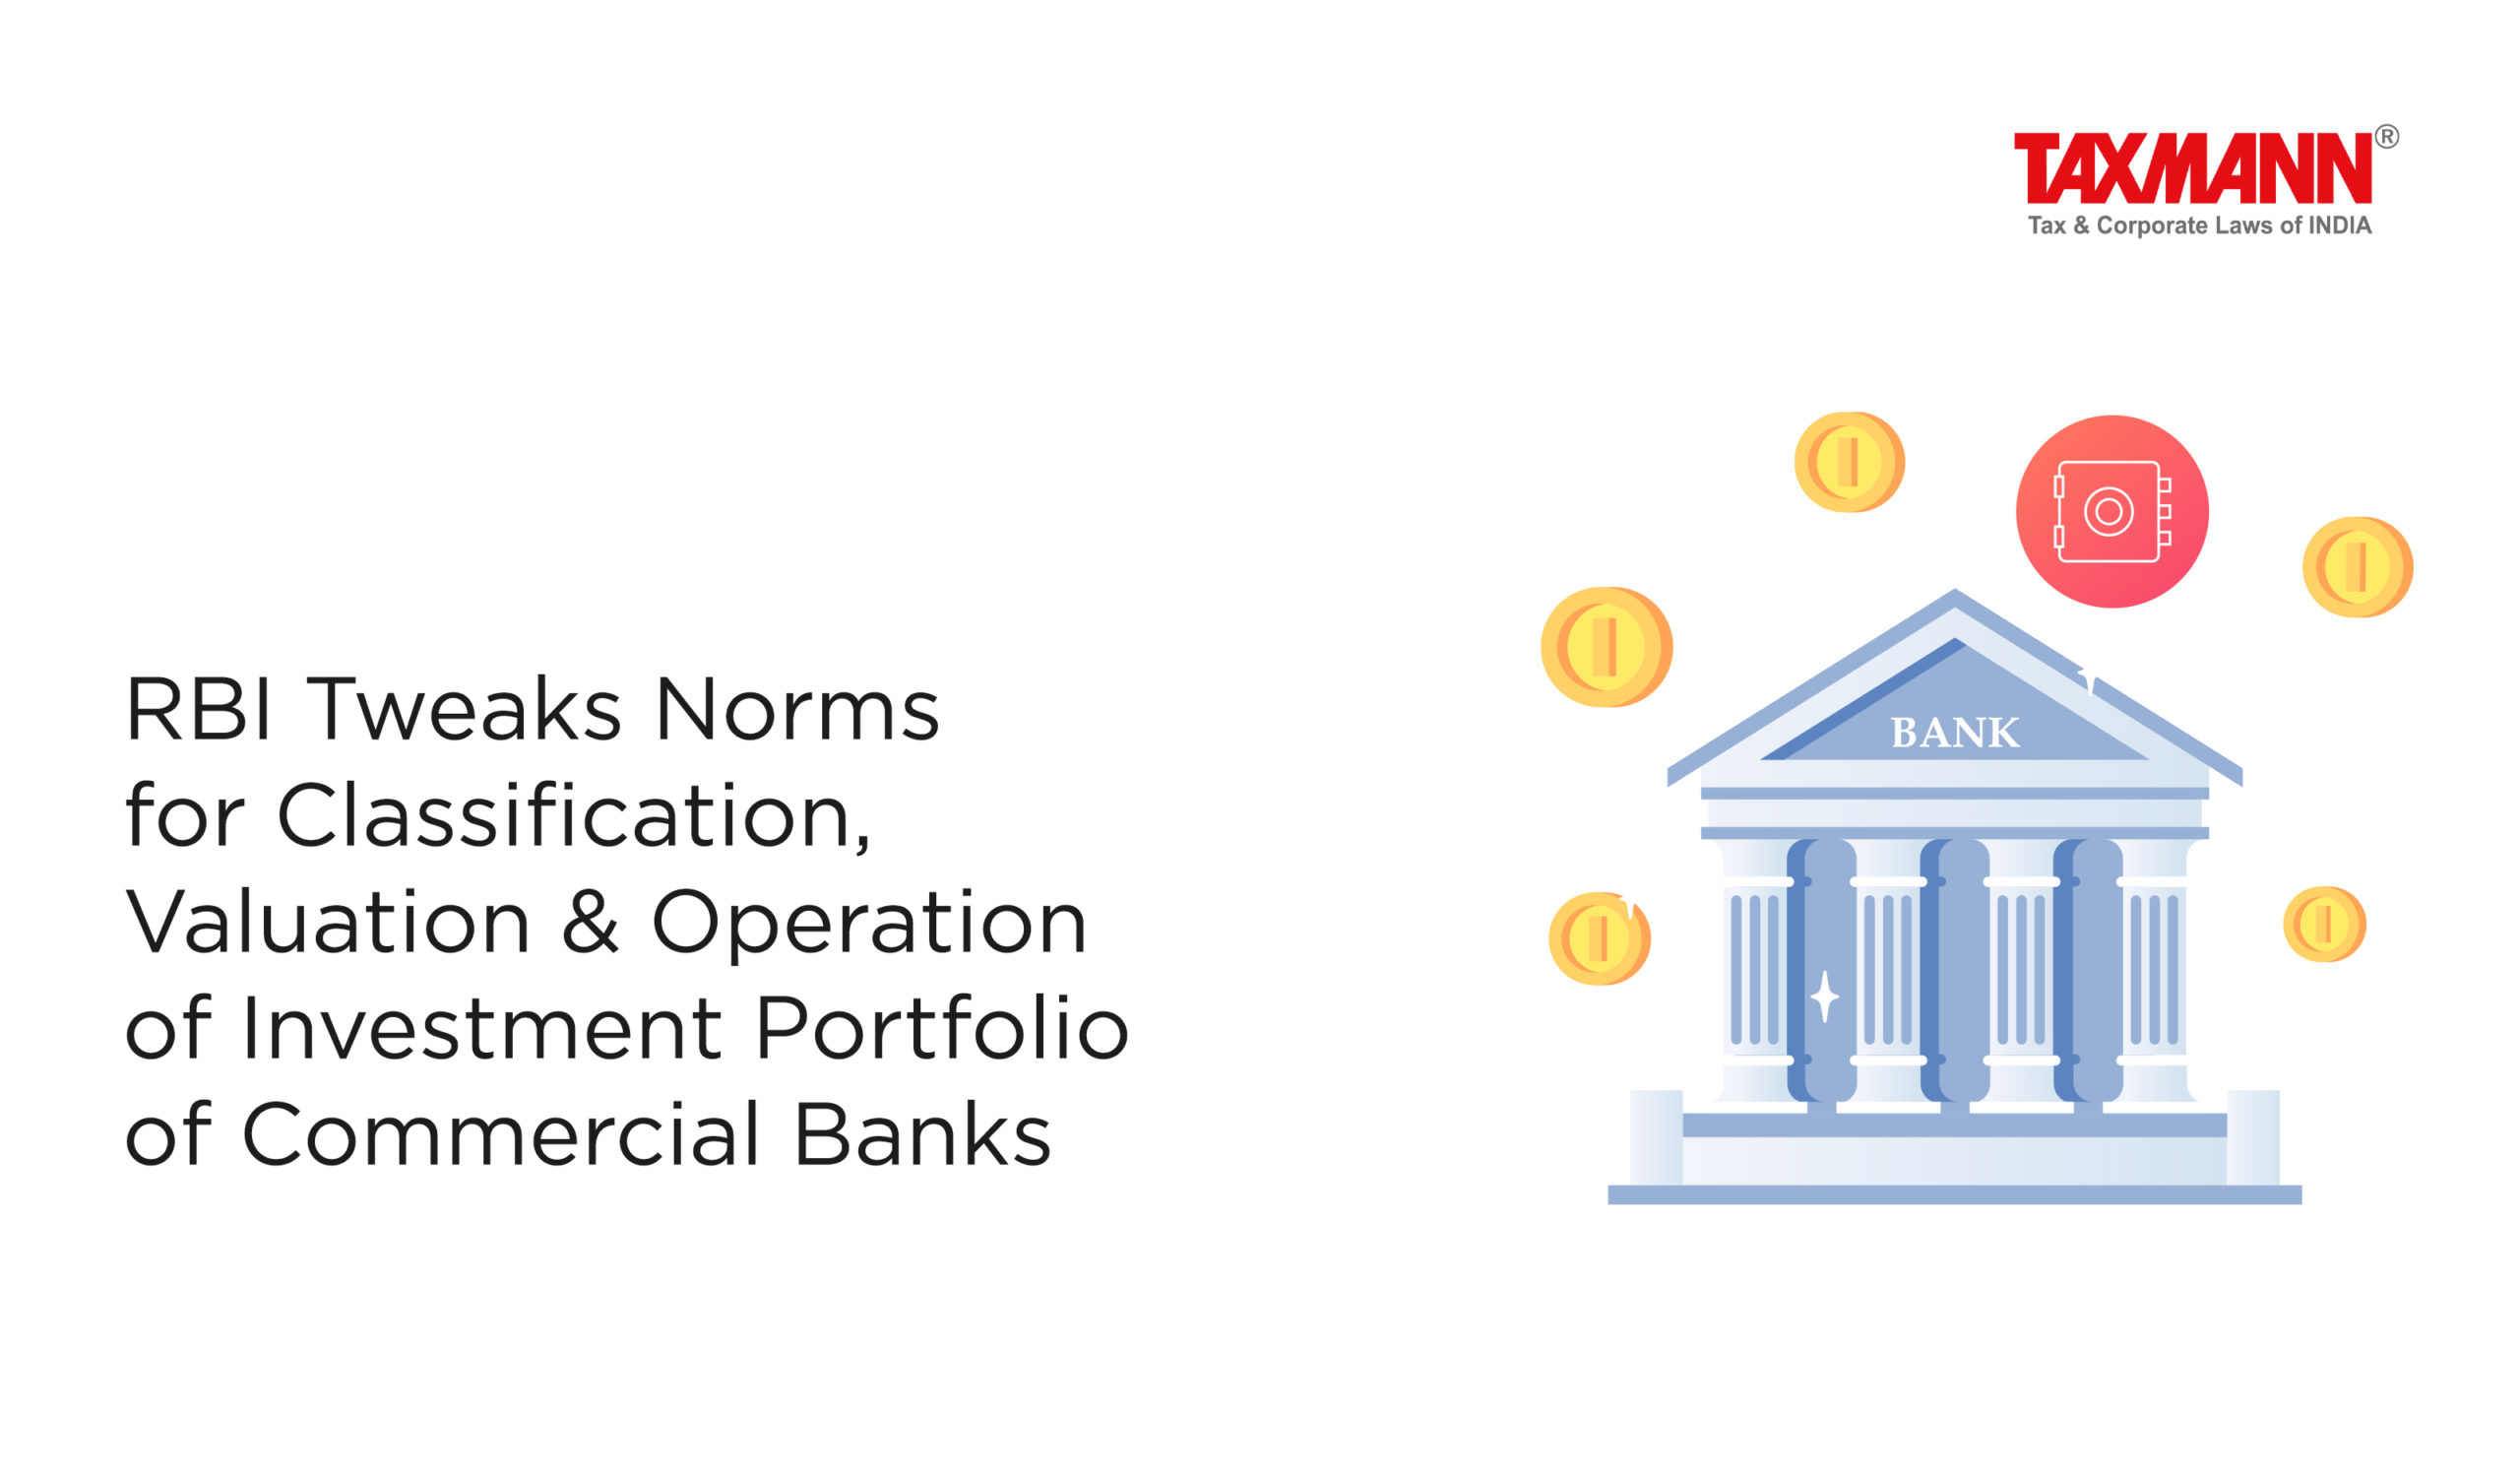 Investment Portfolio of Commercial banks